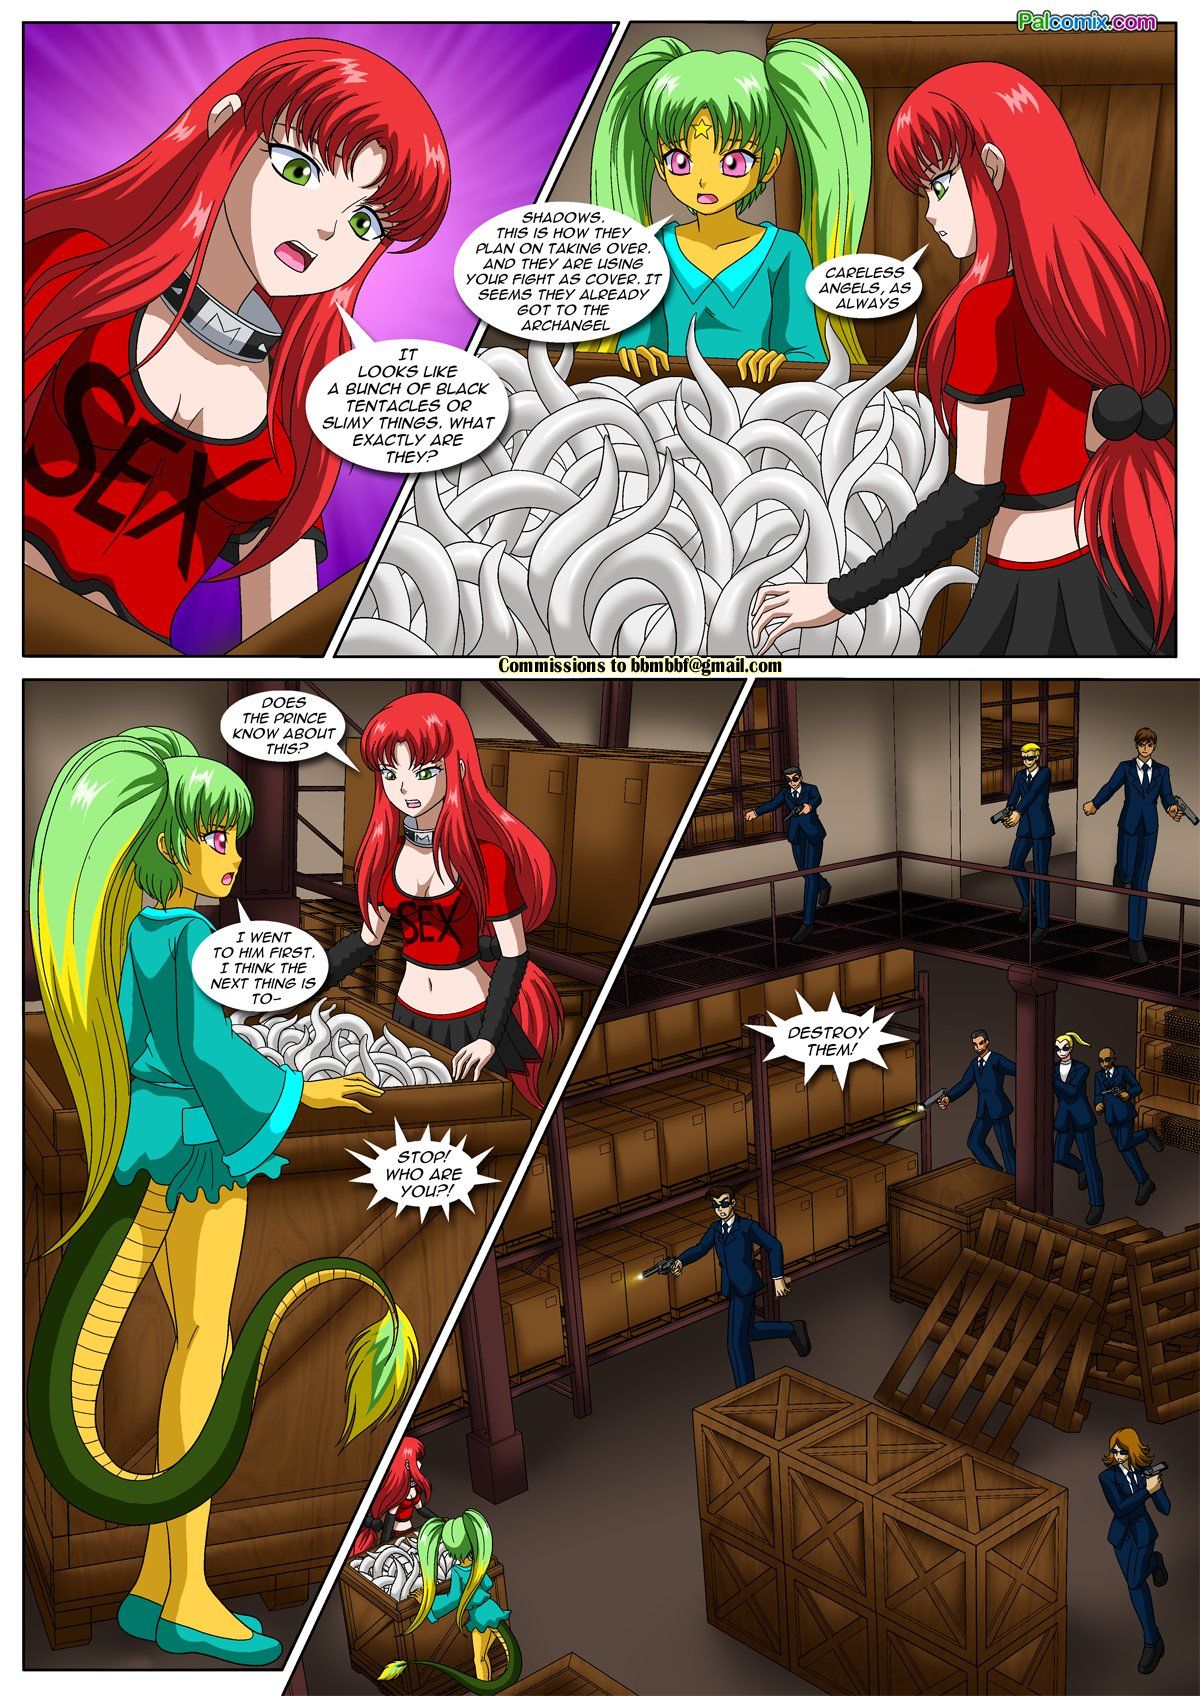 The Carnal Kingdom 6 - Angels and Demons page 37